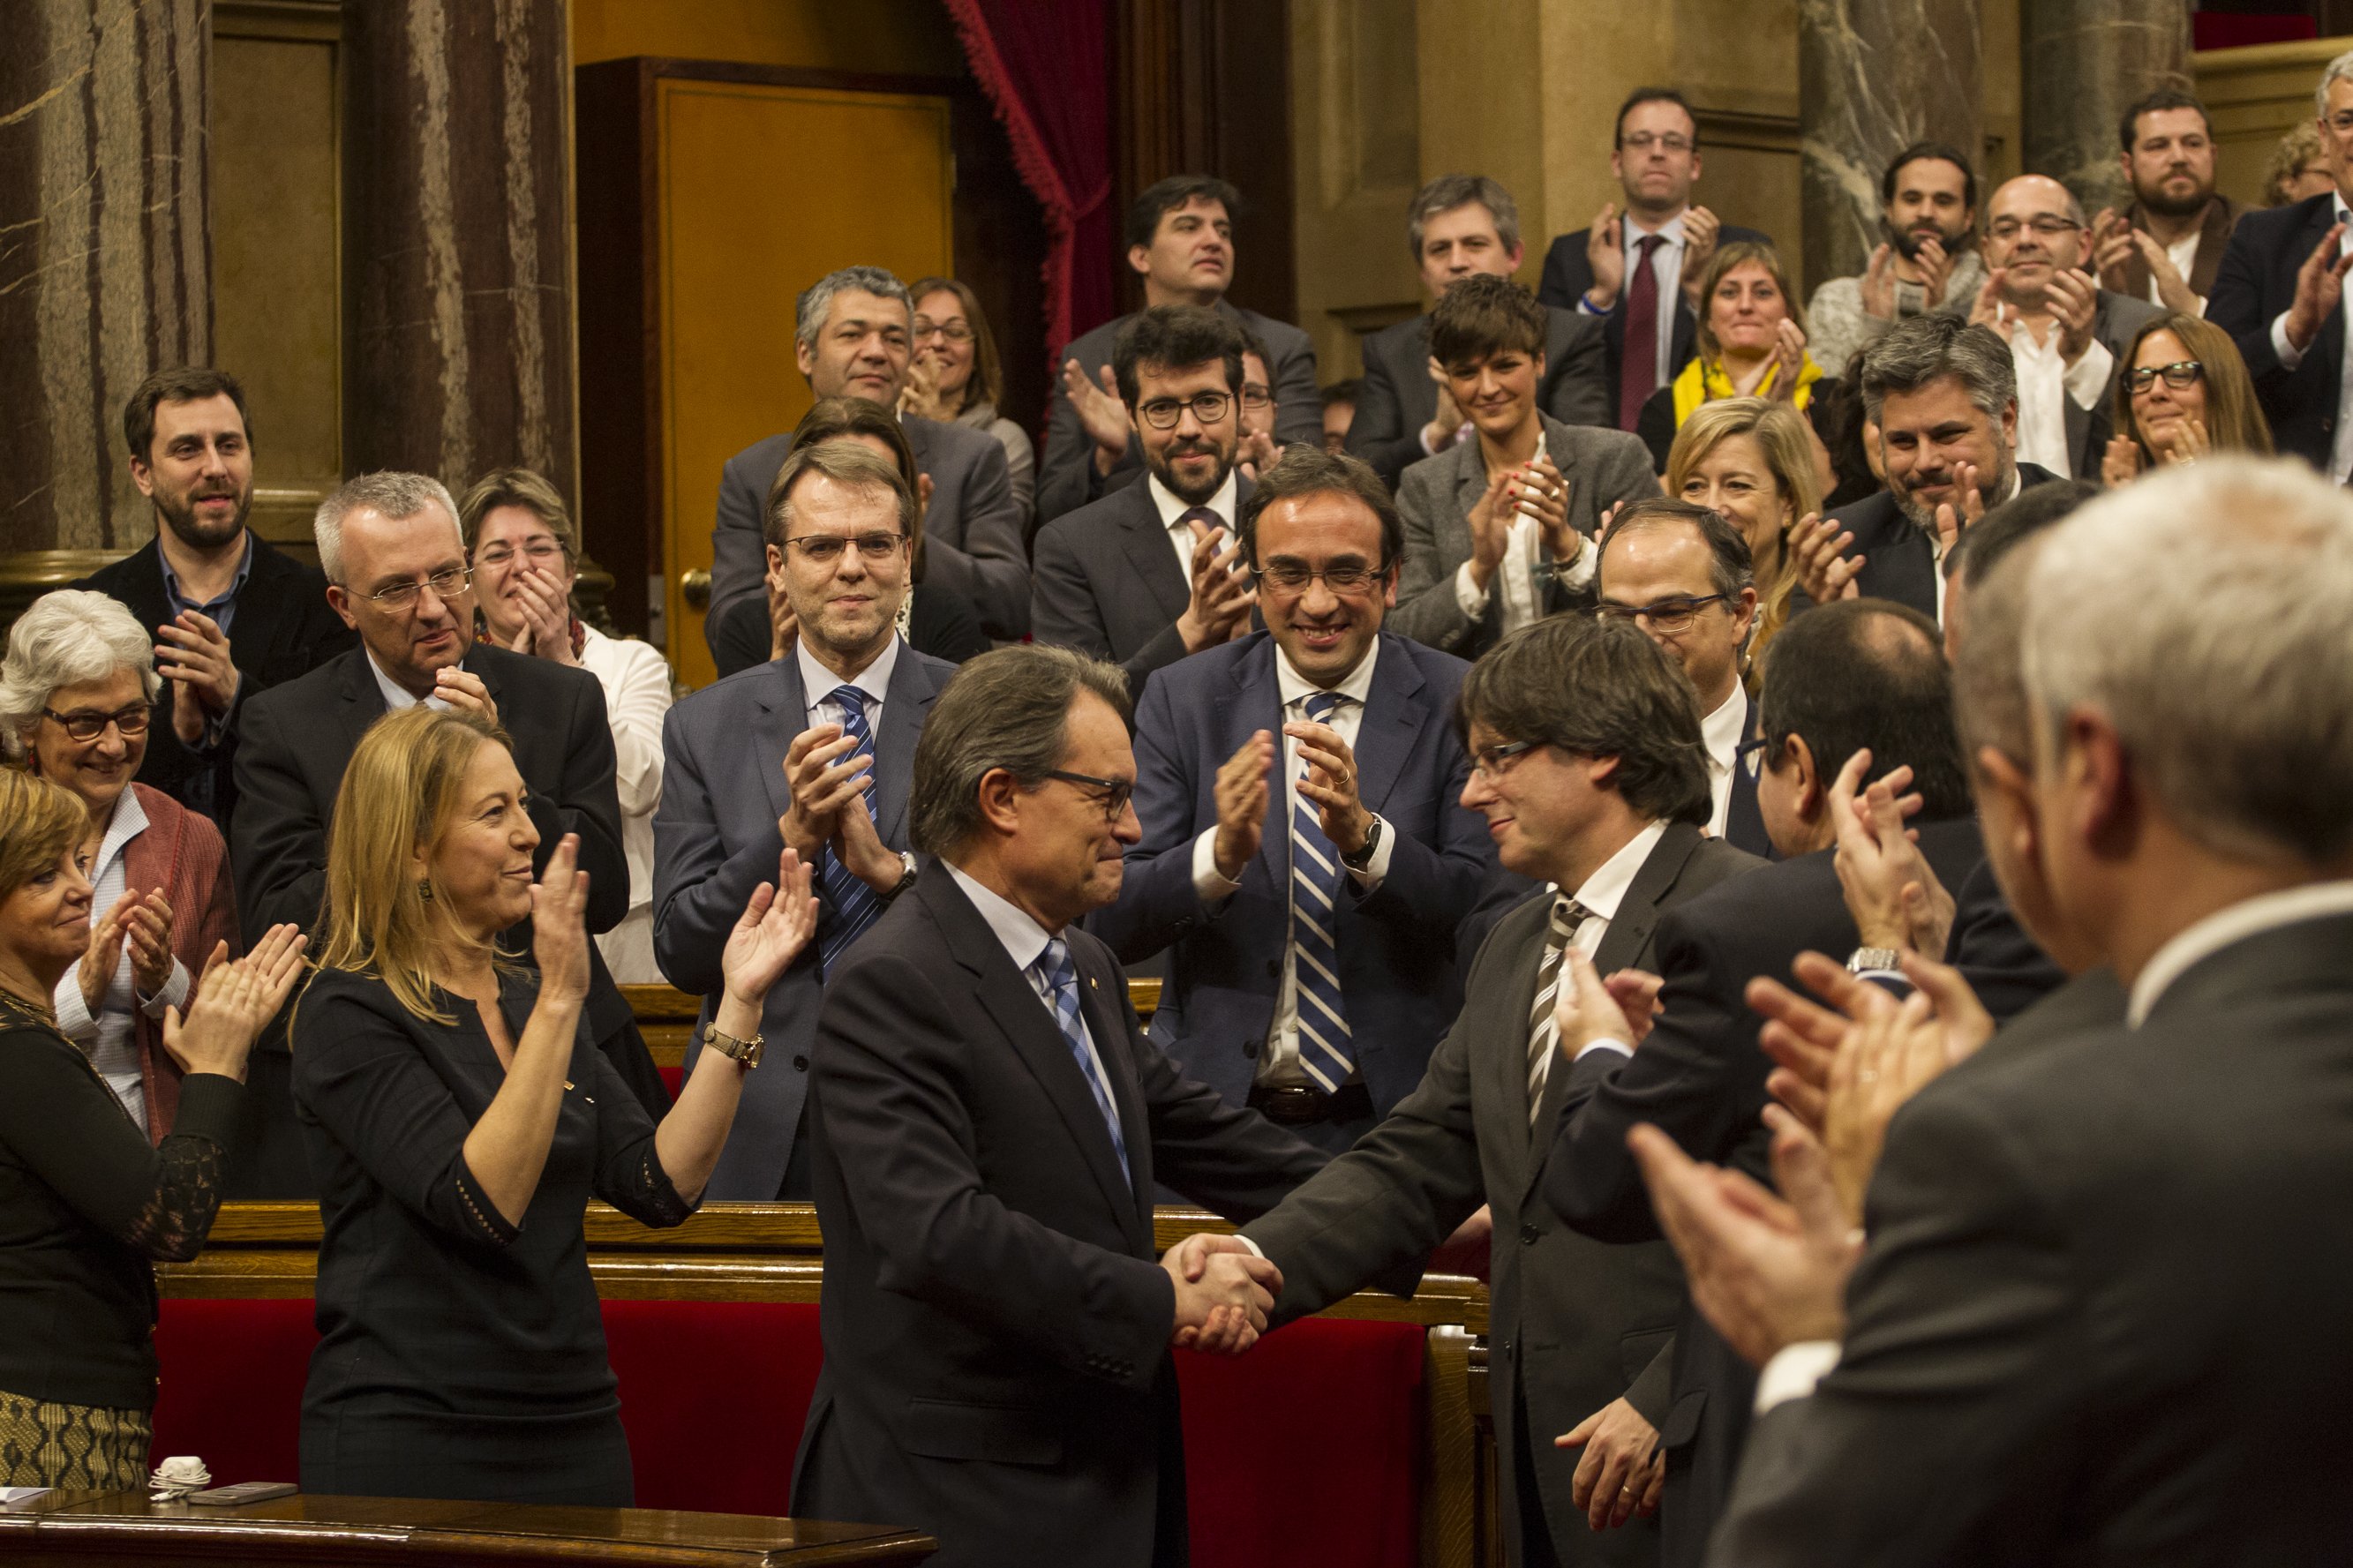 Court of Accounts changes its mind and accepts bond in Catalan independence case